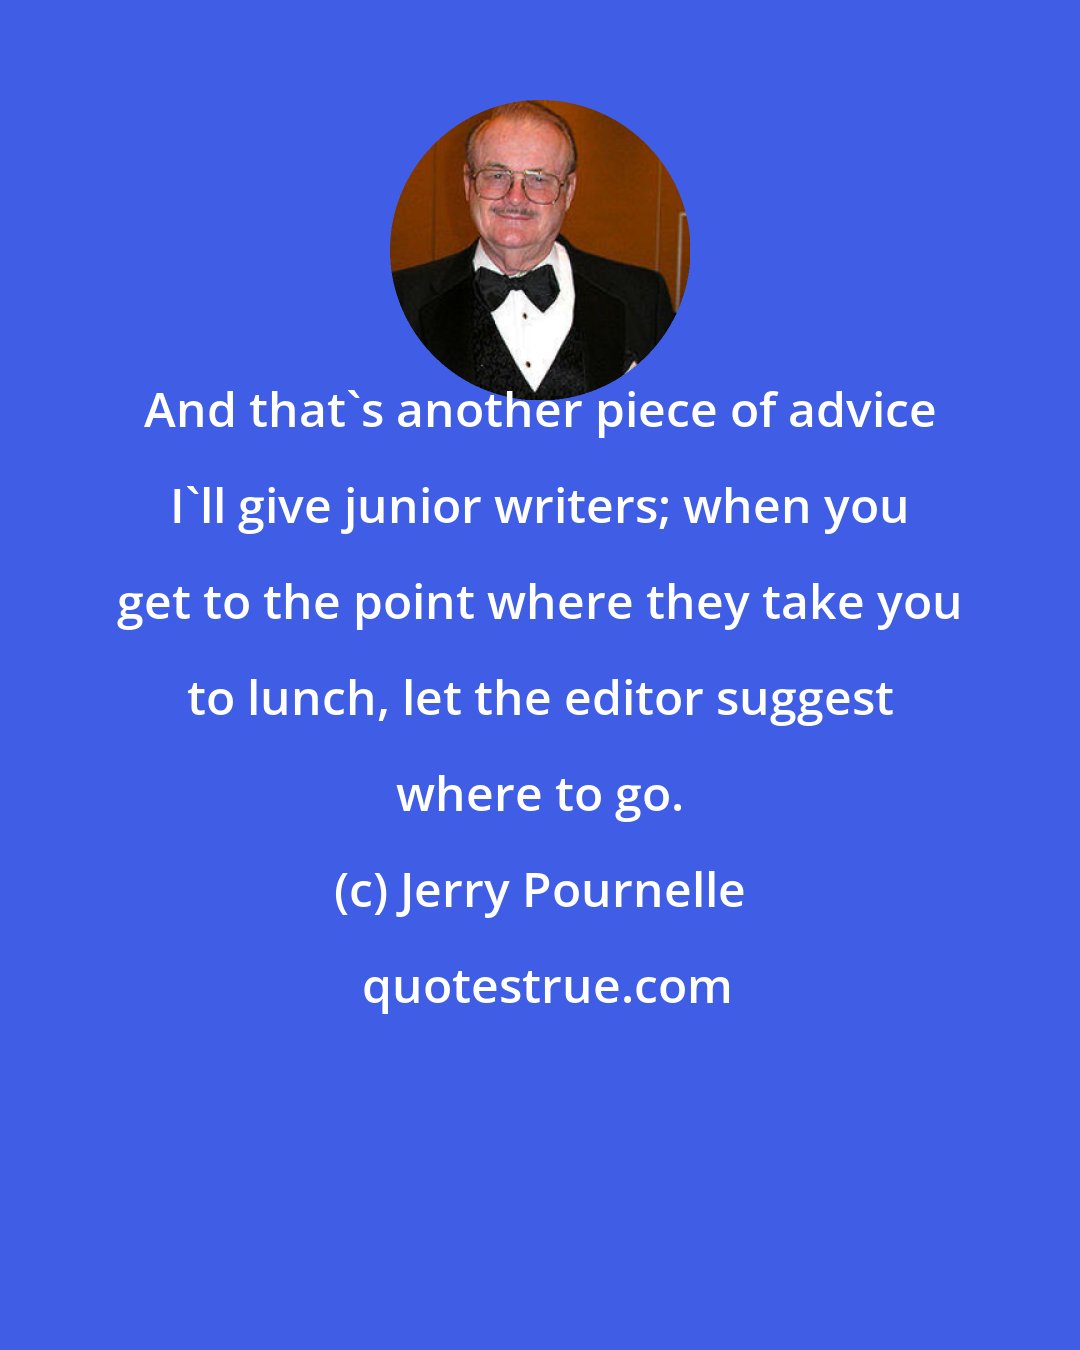 Jerry Pournelle: And that's another piece of advice I'll give junior writers; when you get to the point where they take you to lunch, let the editor suggest where to go.